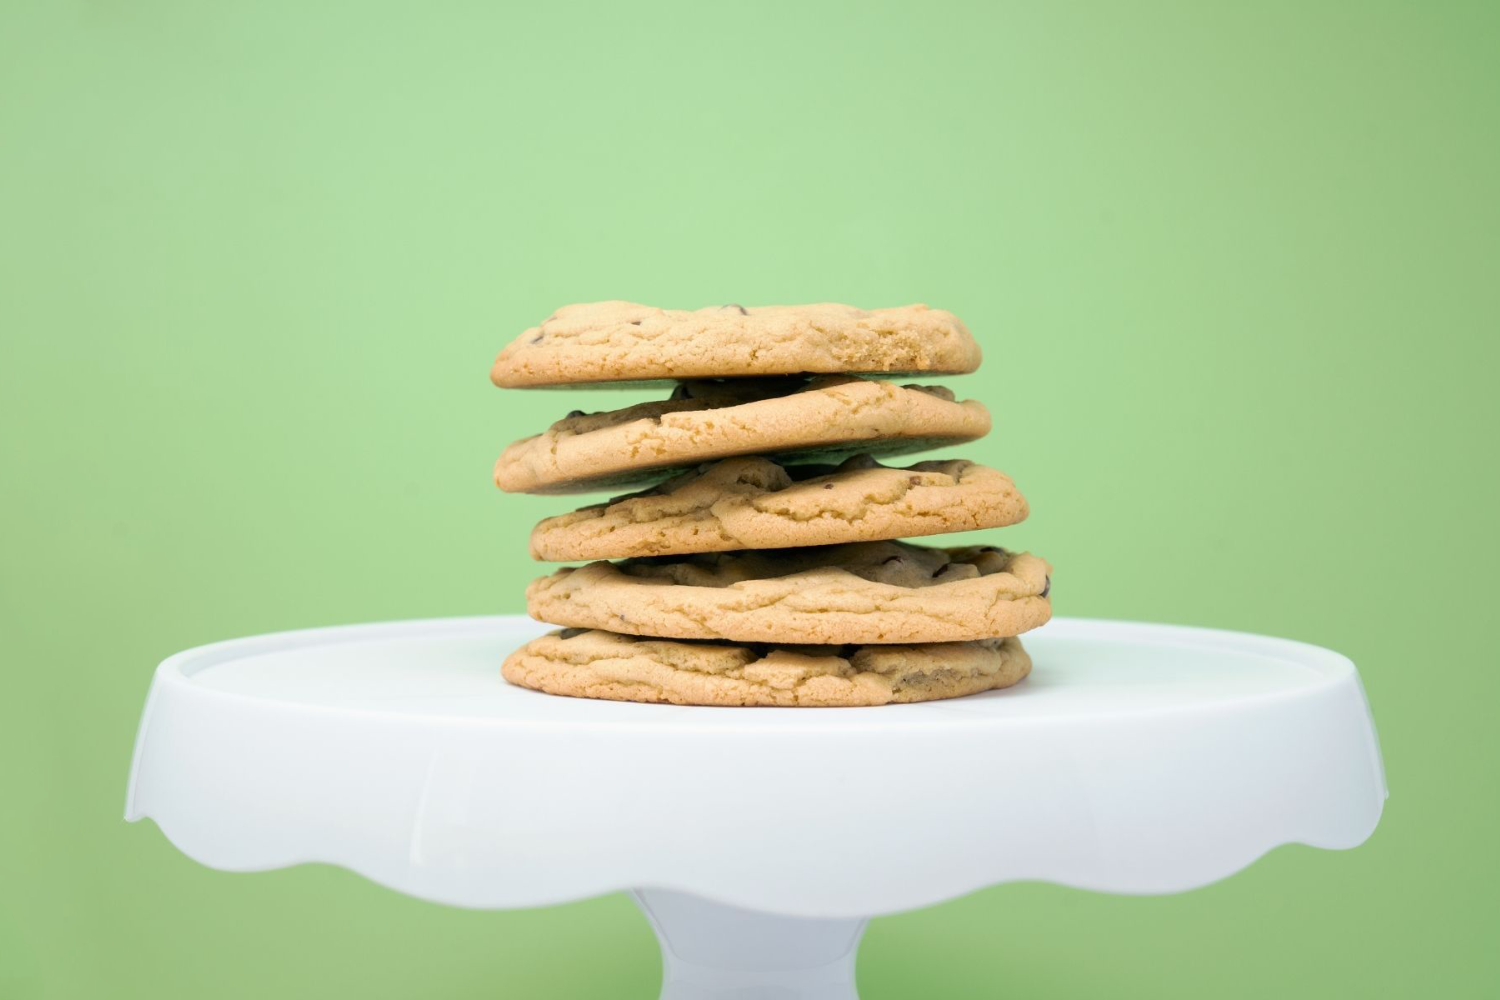 A stack of cookies on a green background